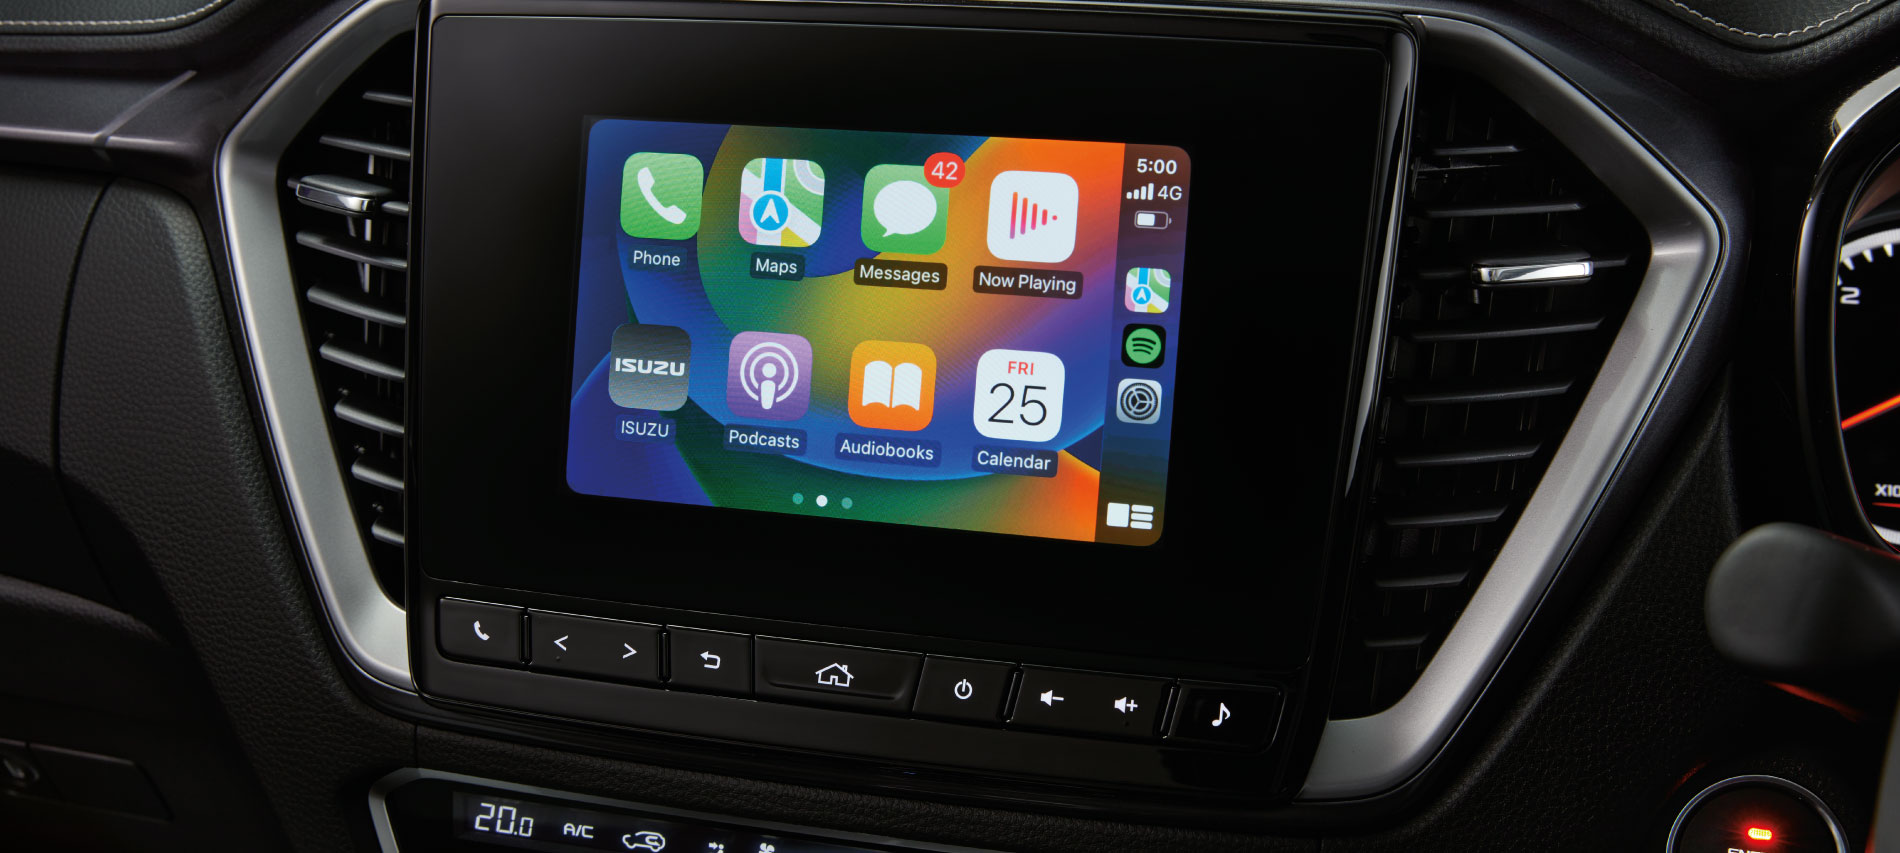 7 INCH TOUCH SCREEN INFOTAINMENT SYSTEM